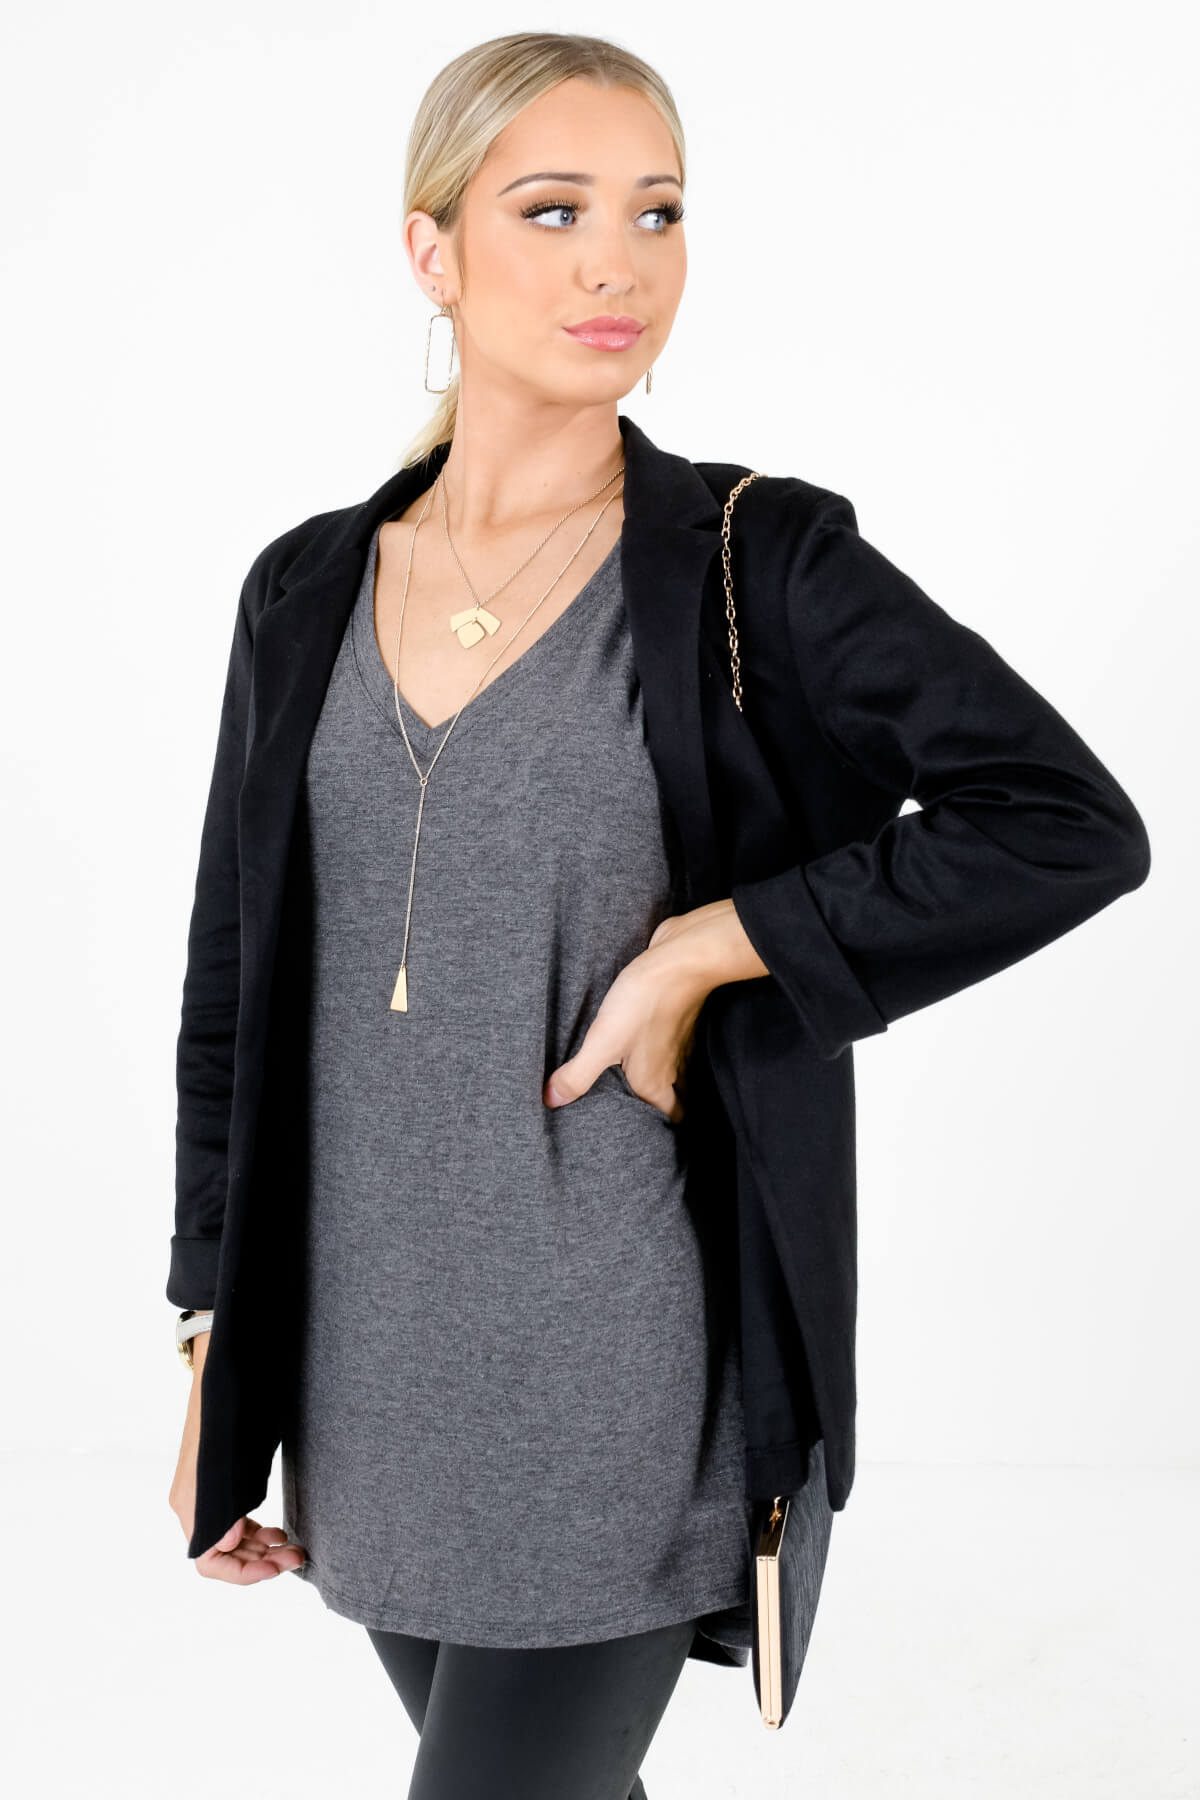 Charcoal Gray Cute and Comfortable Boutique Tops for Women